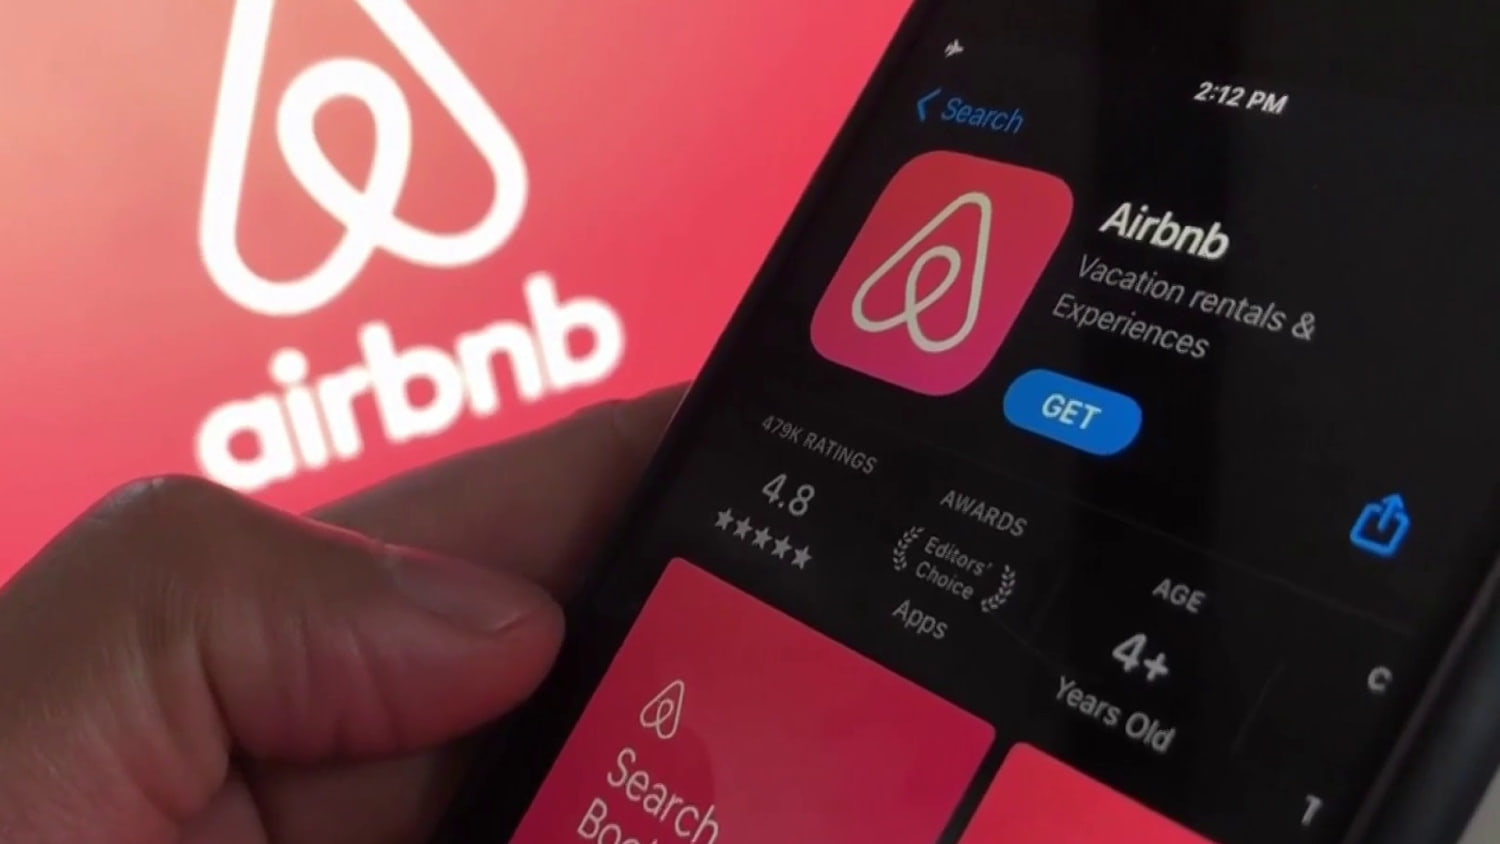 Airbnb CEO discusses what’s in store for the company ahead of summer travel season